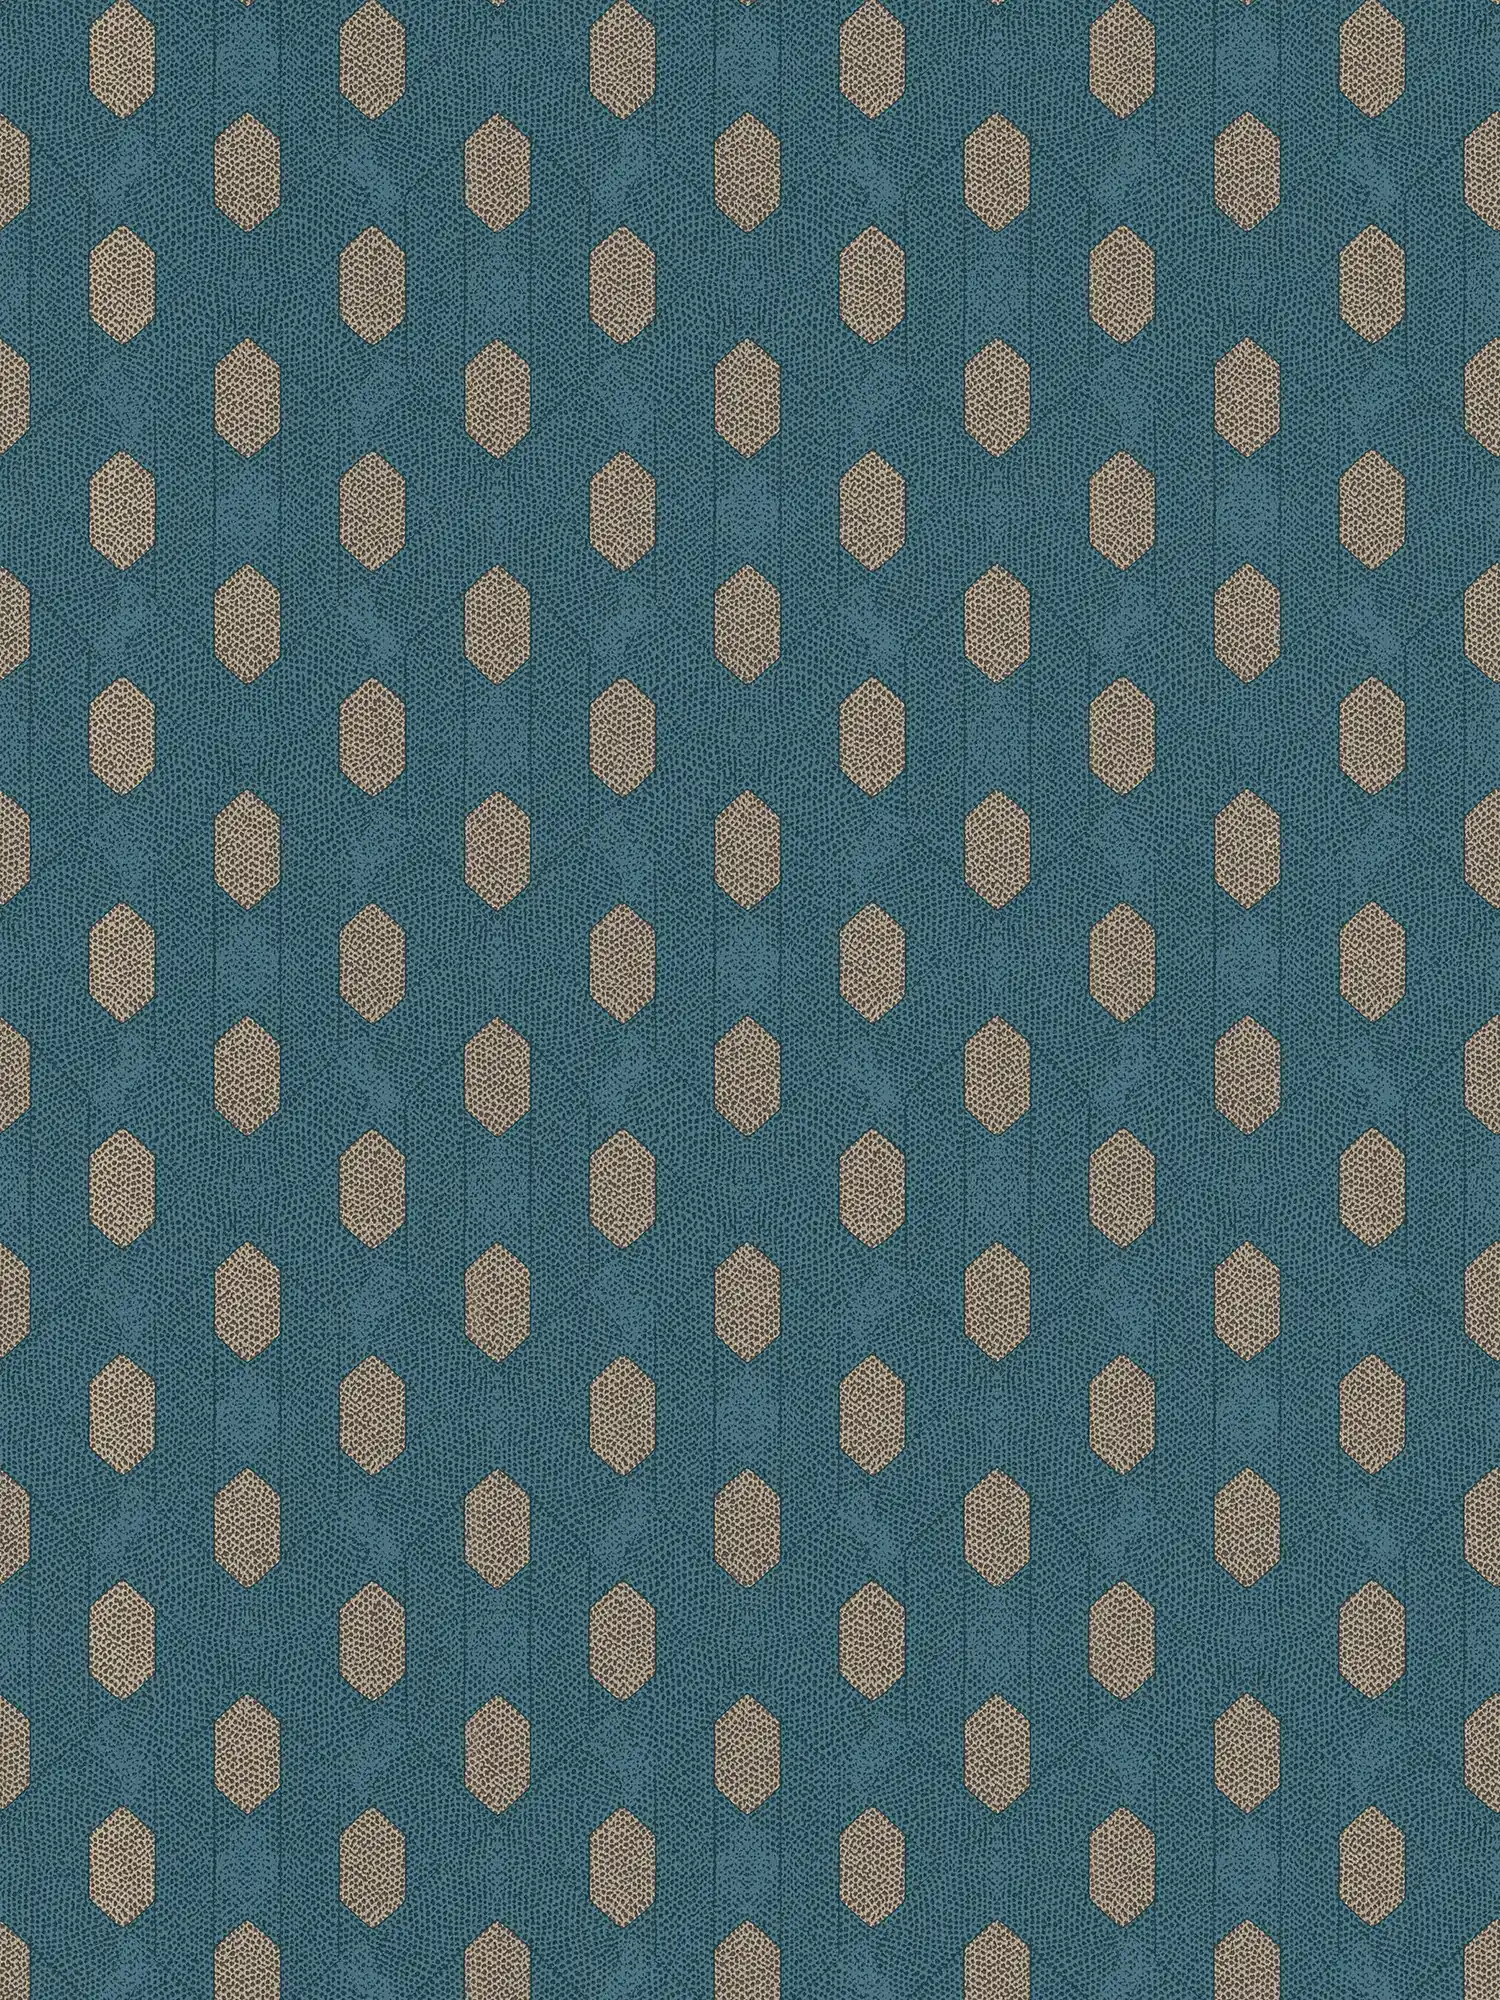 Blue wallpaper with geometric pattern & gold details - blue, brown, beige
